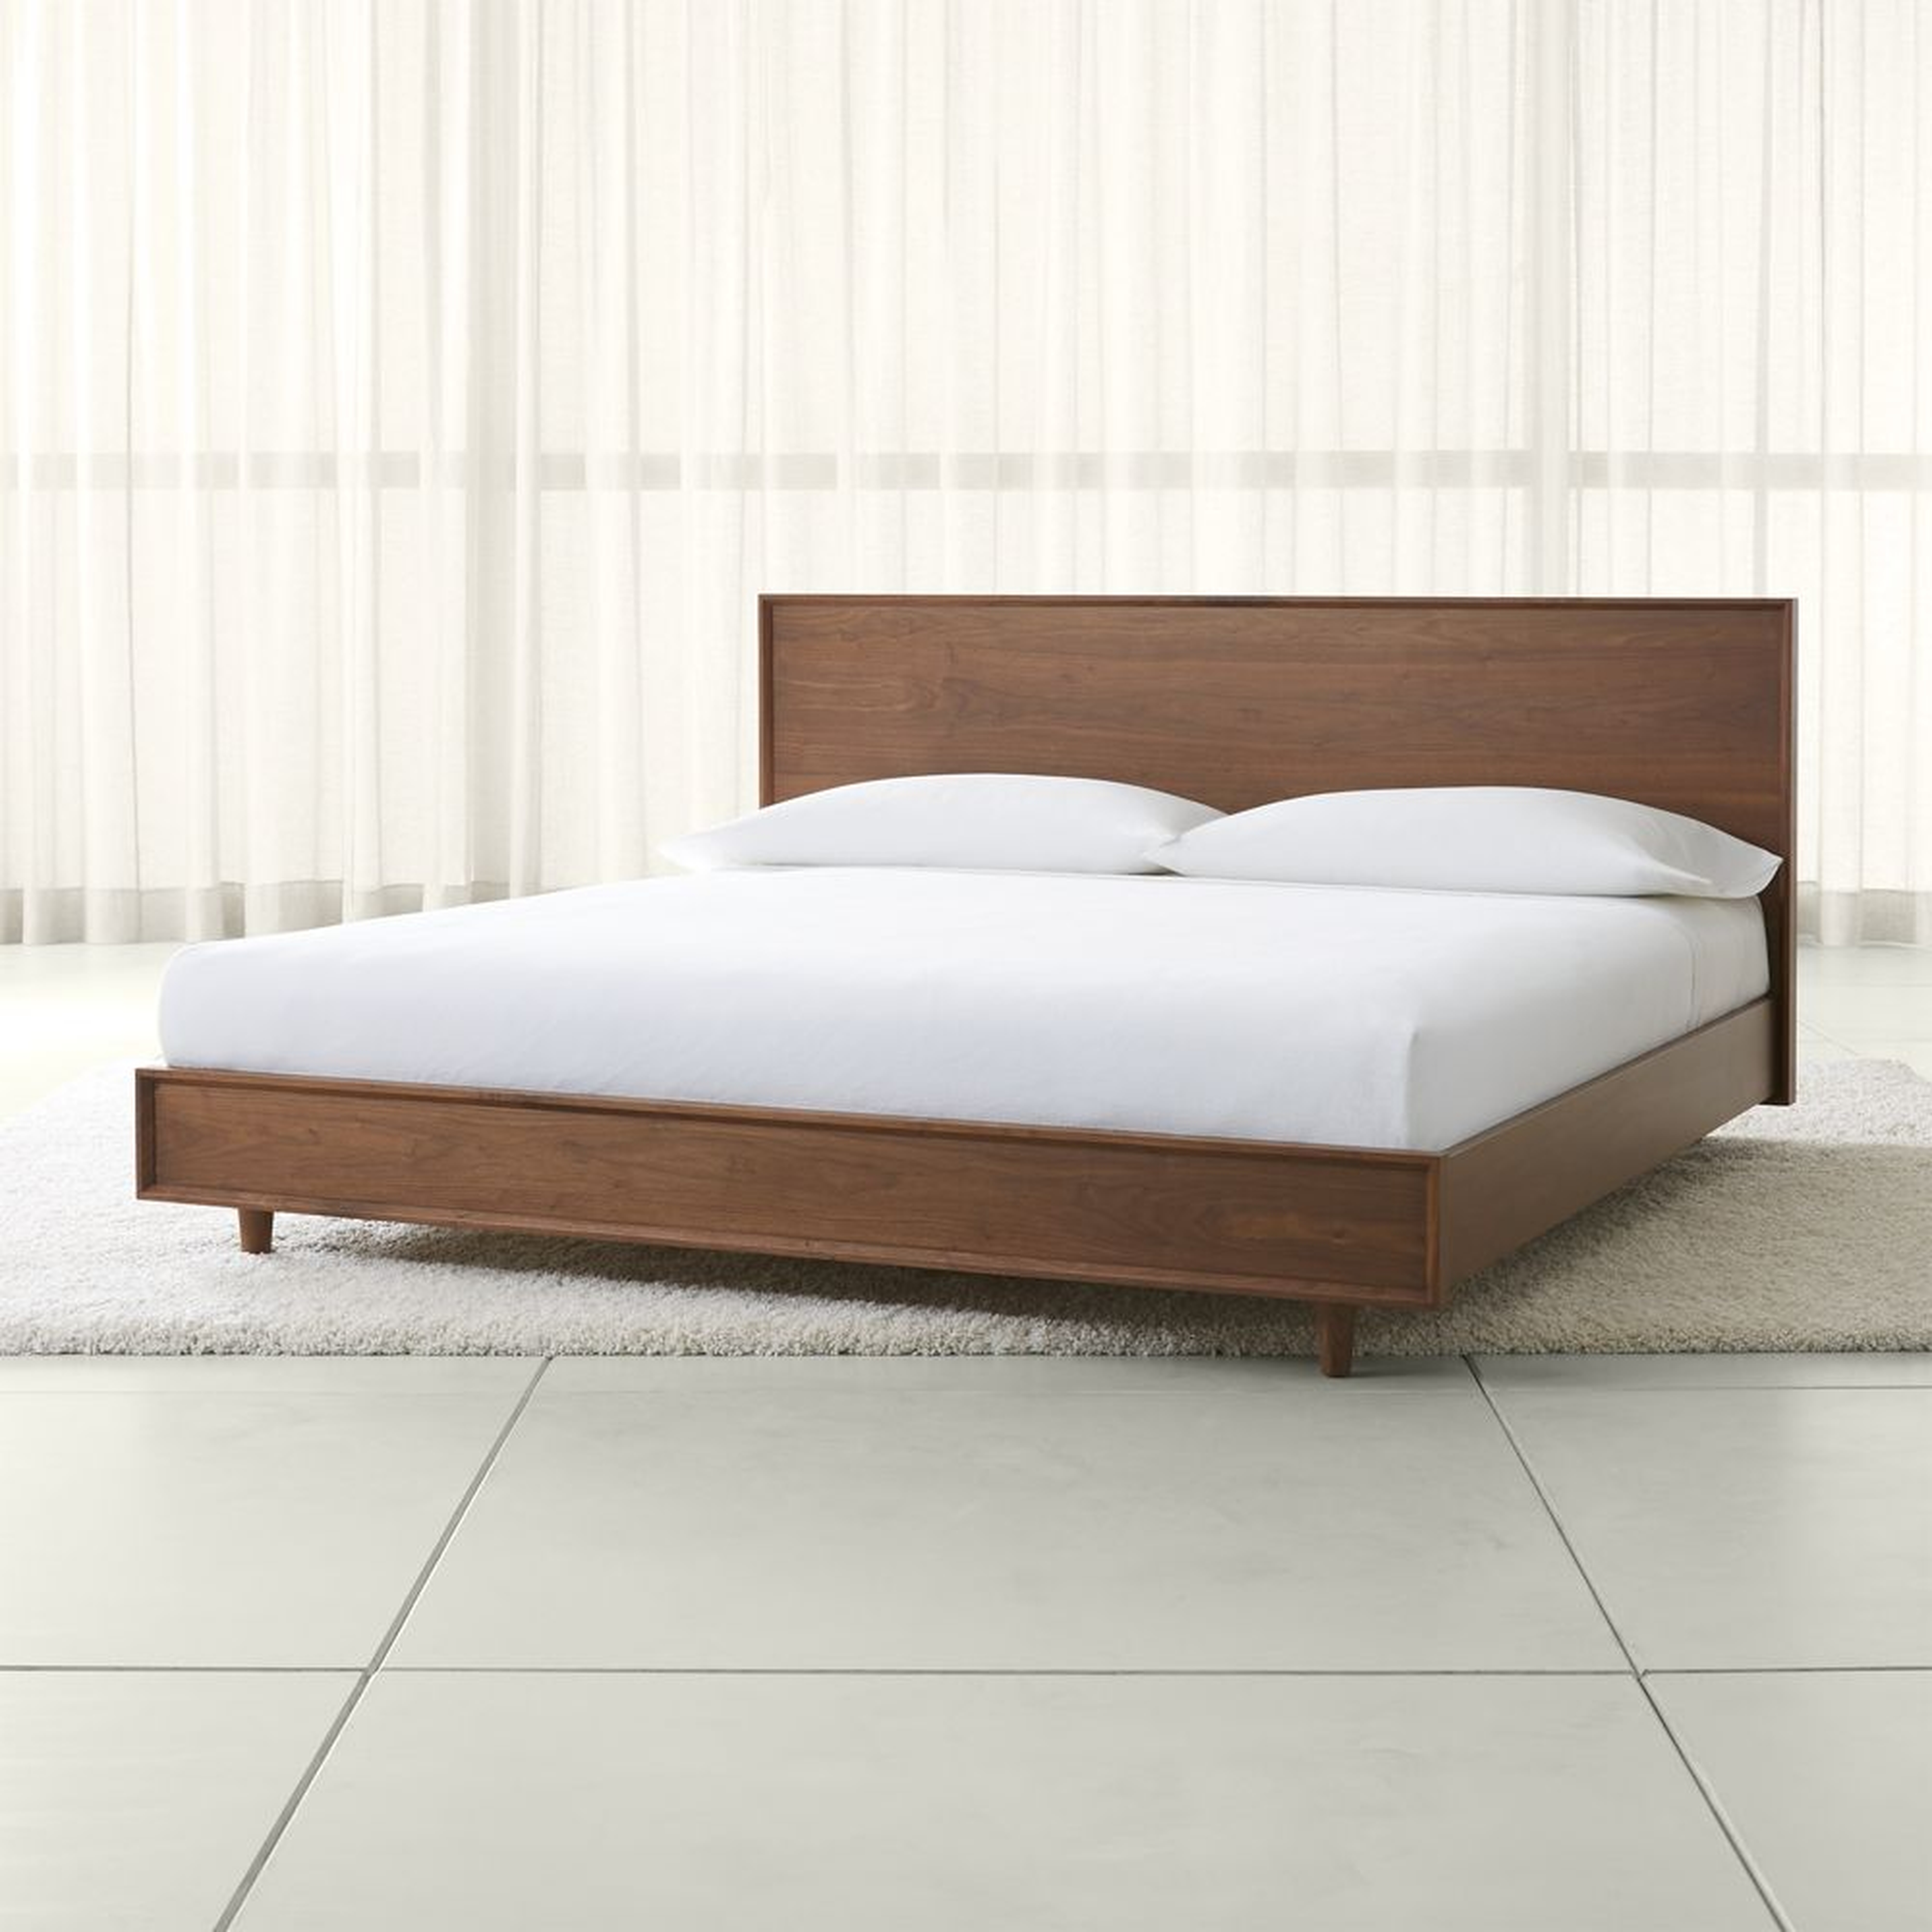 Tate Walnut King Wood Bed - Crate and Barrel